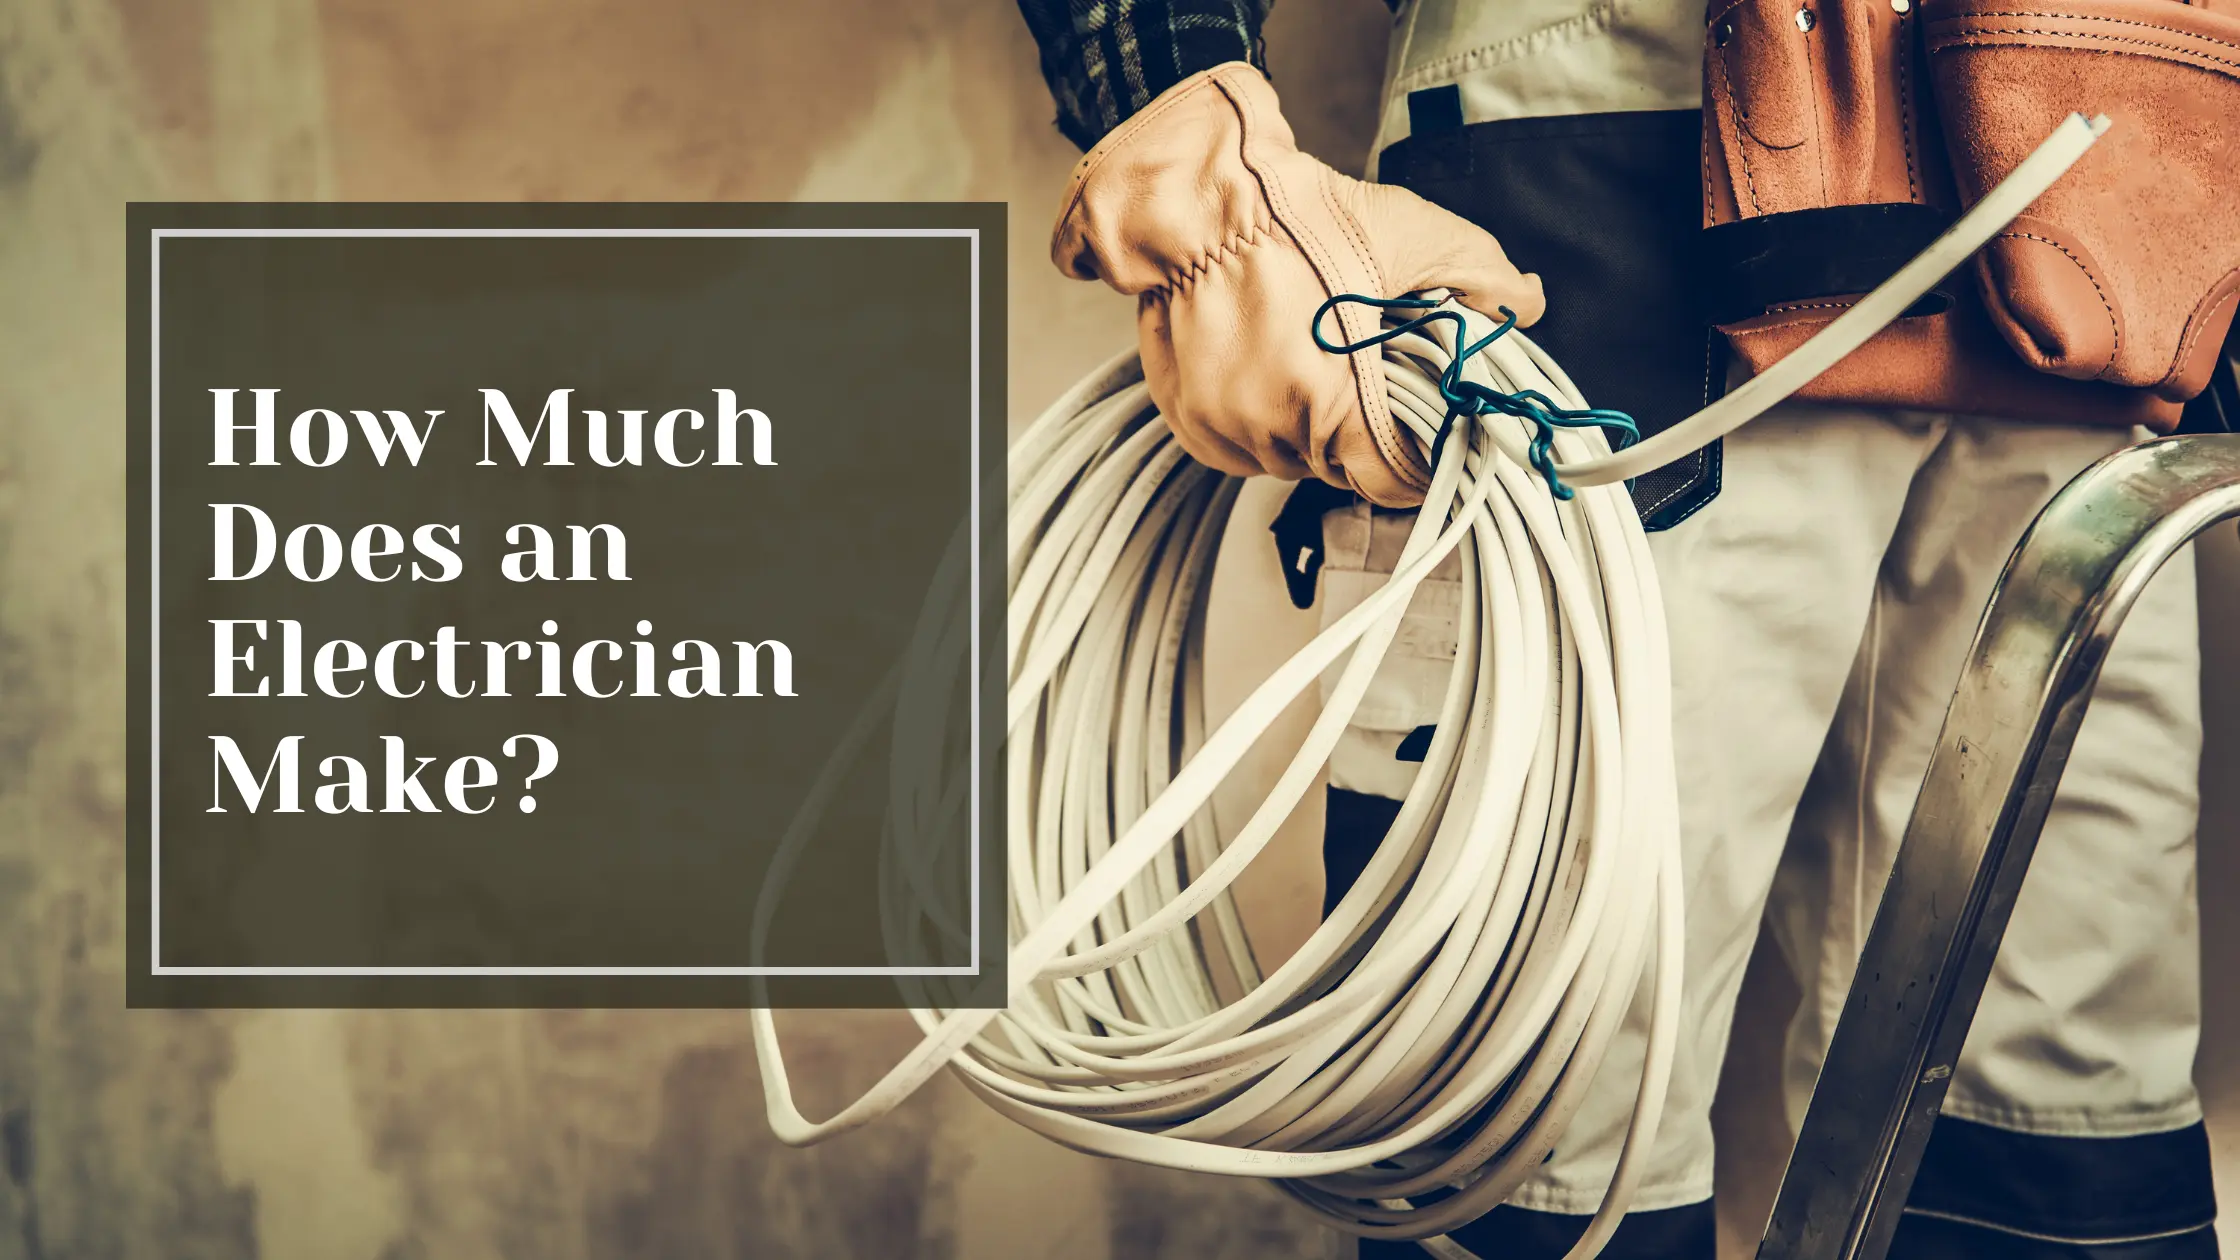 How Much Does an Electrician Make?